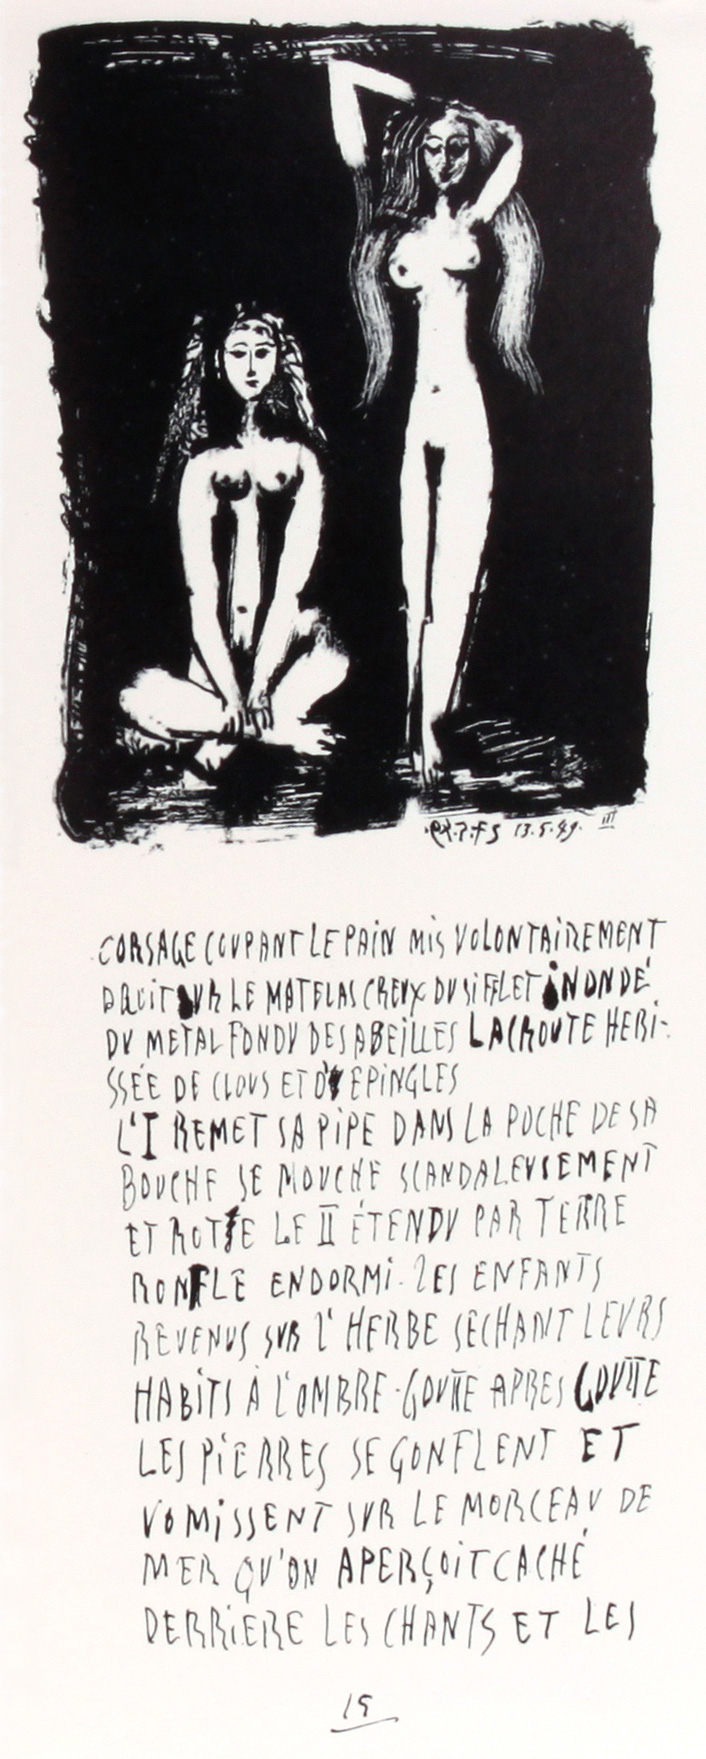 Picasso Lithographs by Fernand Mourlot - Poems and Lithographs - פאבלו פיקאסו - שירים וליתוגרפיות